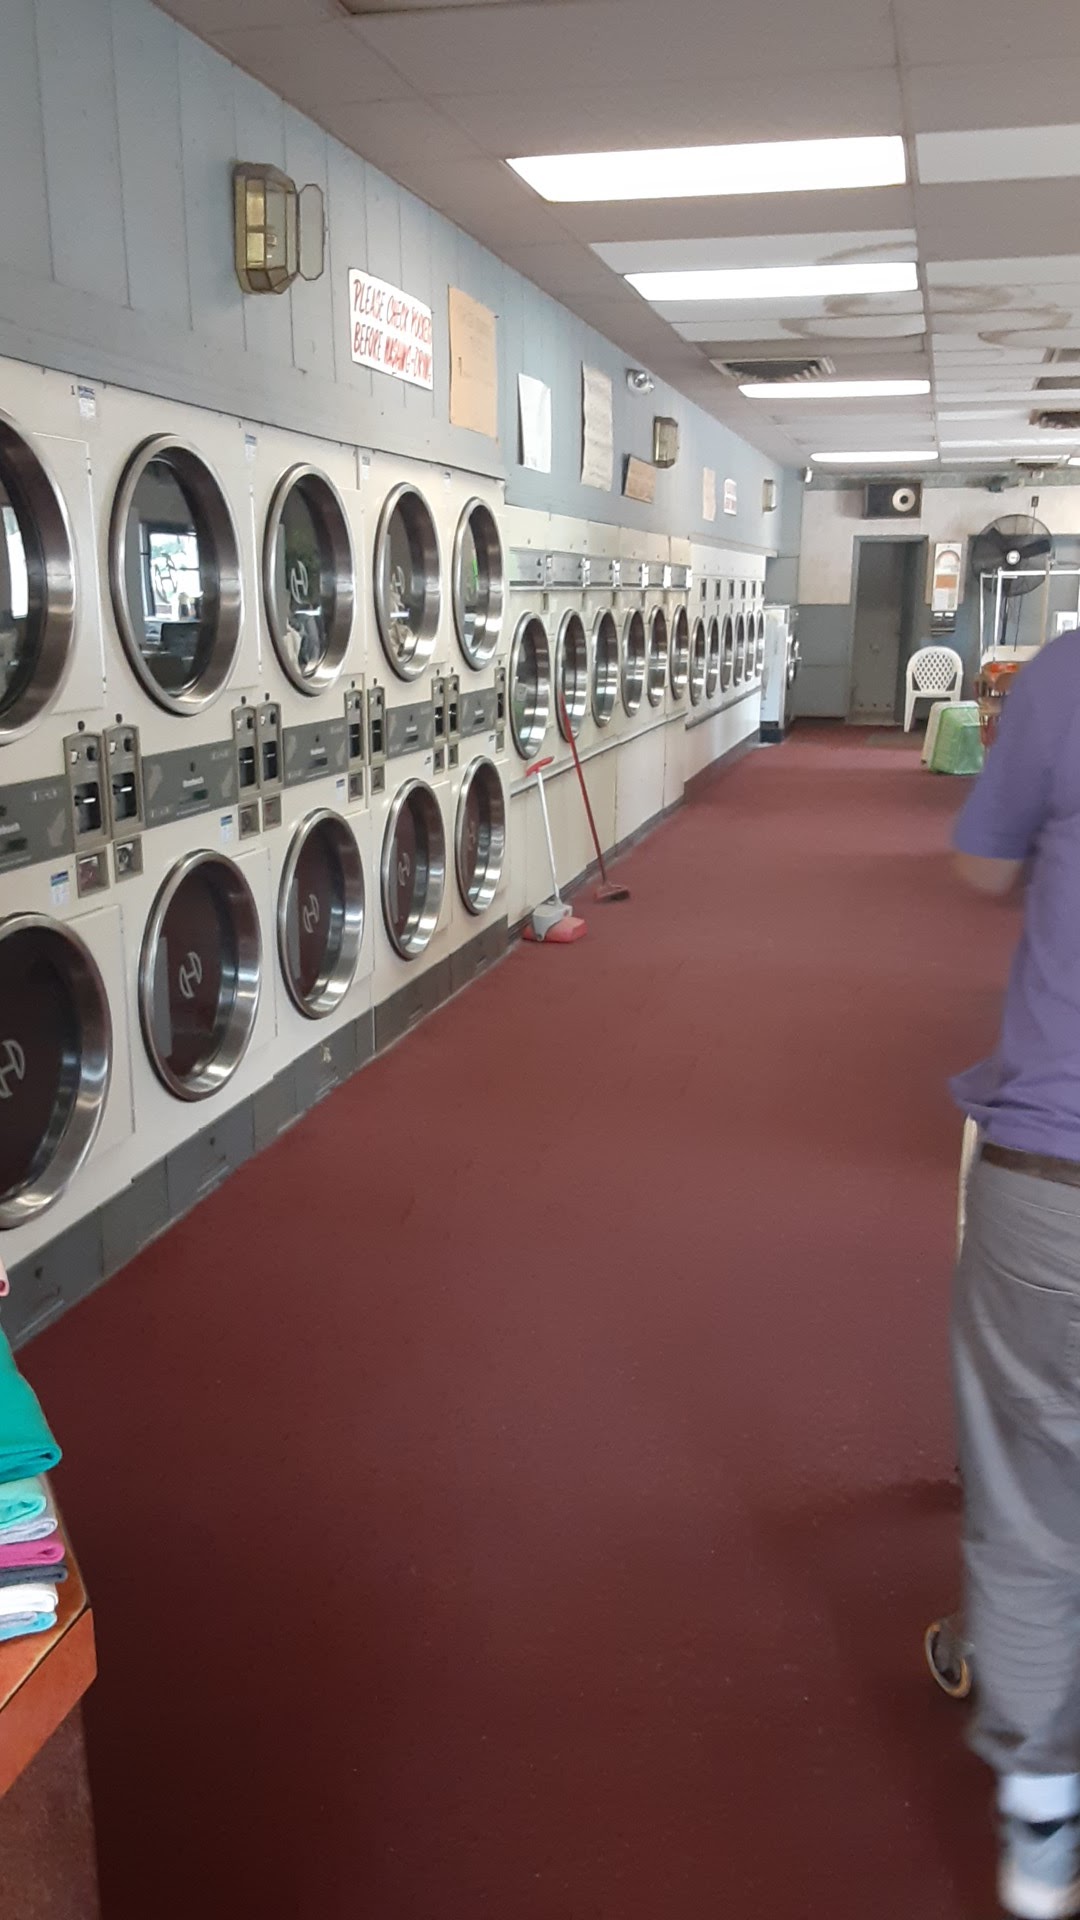 East Main Coin Laundry & Dry Cleaning